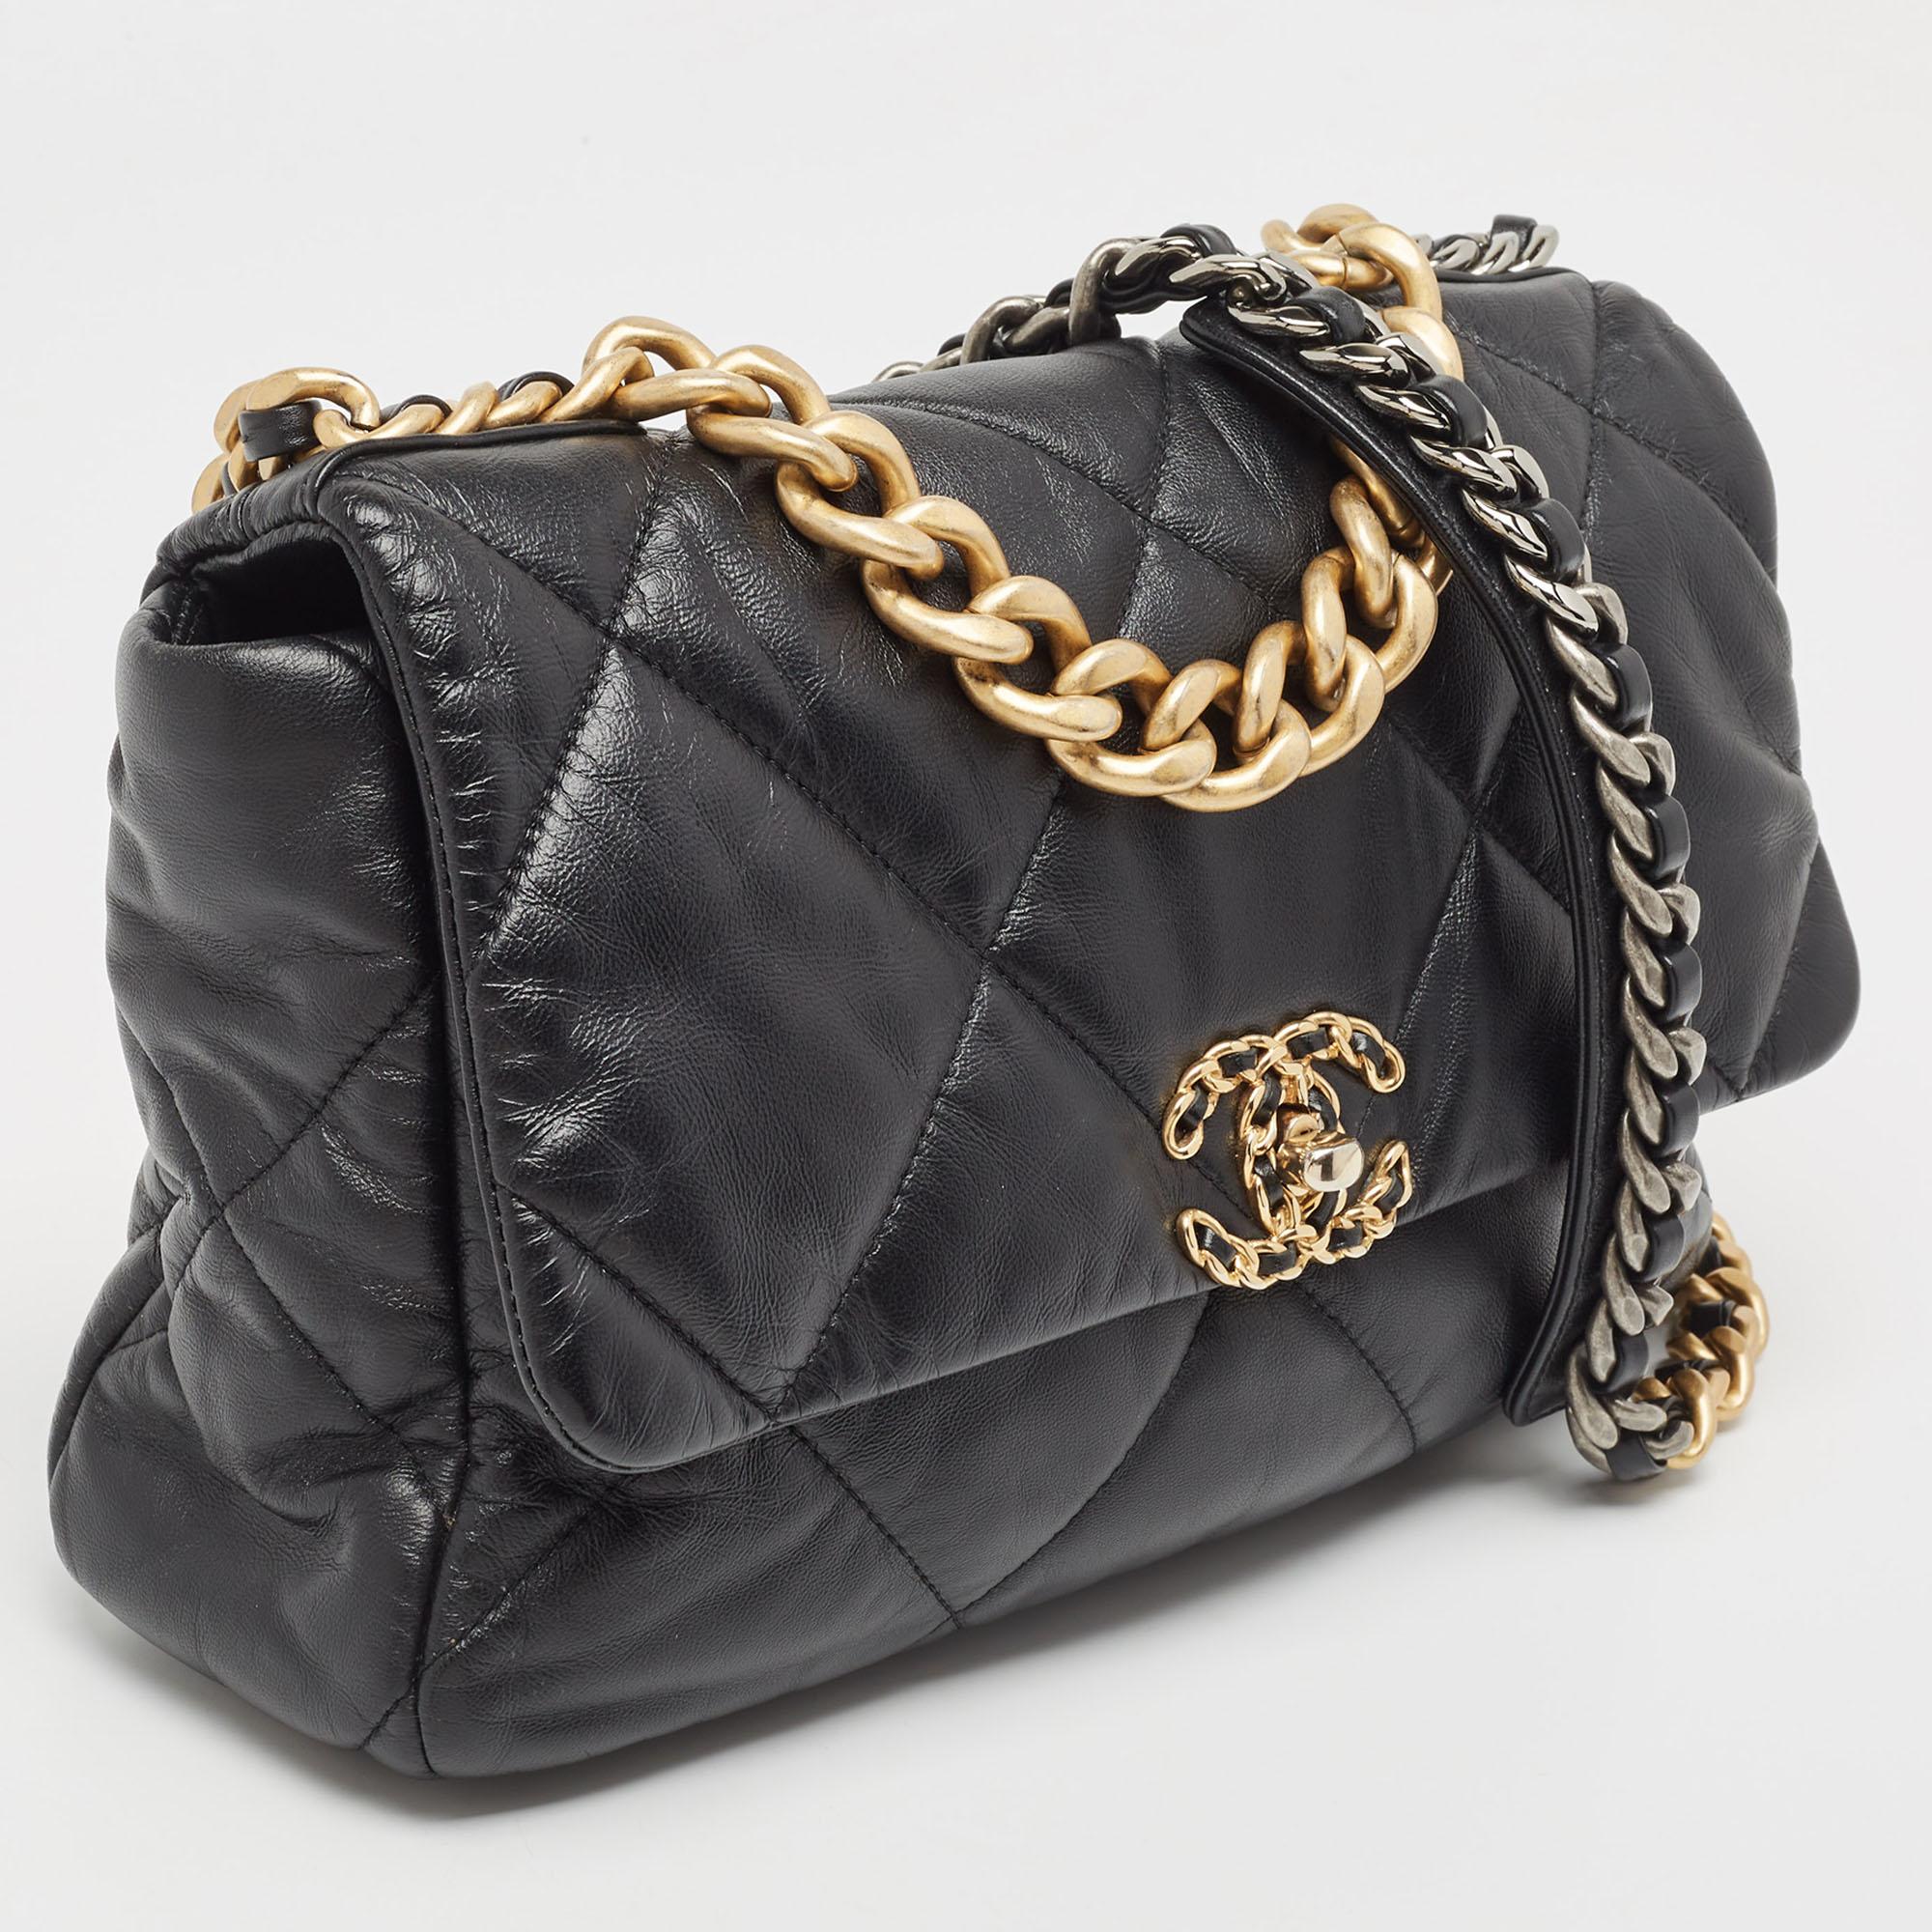 Chanel Black Quilted Leather Large 19 Flap Bag In Good Condition For Sale In Dubai, Al Qouz 2